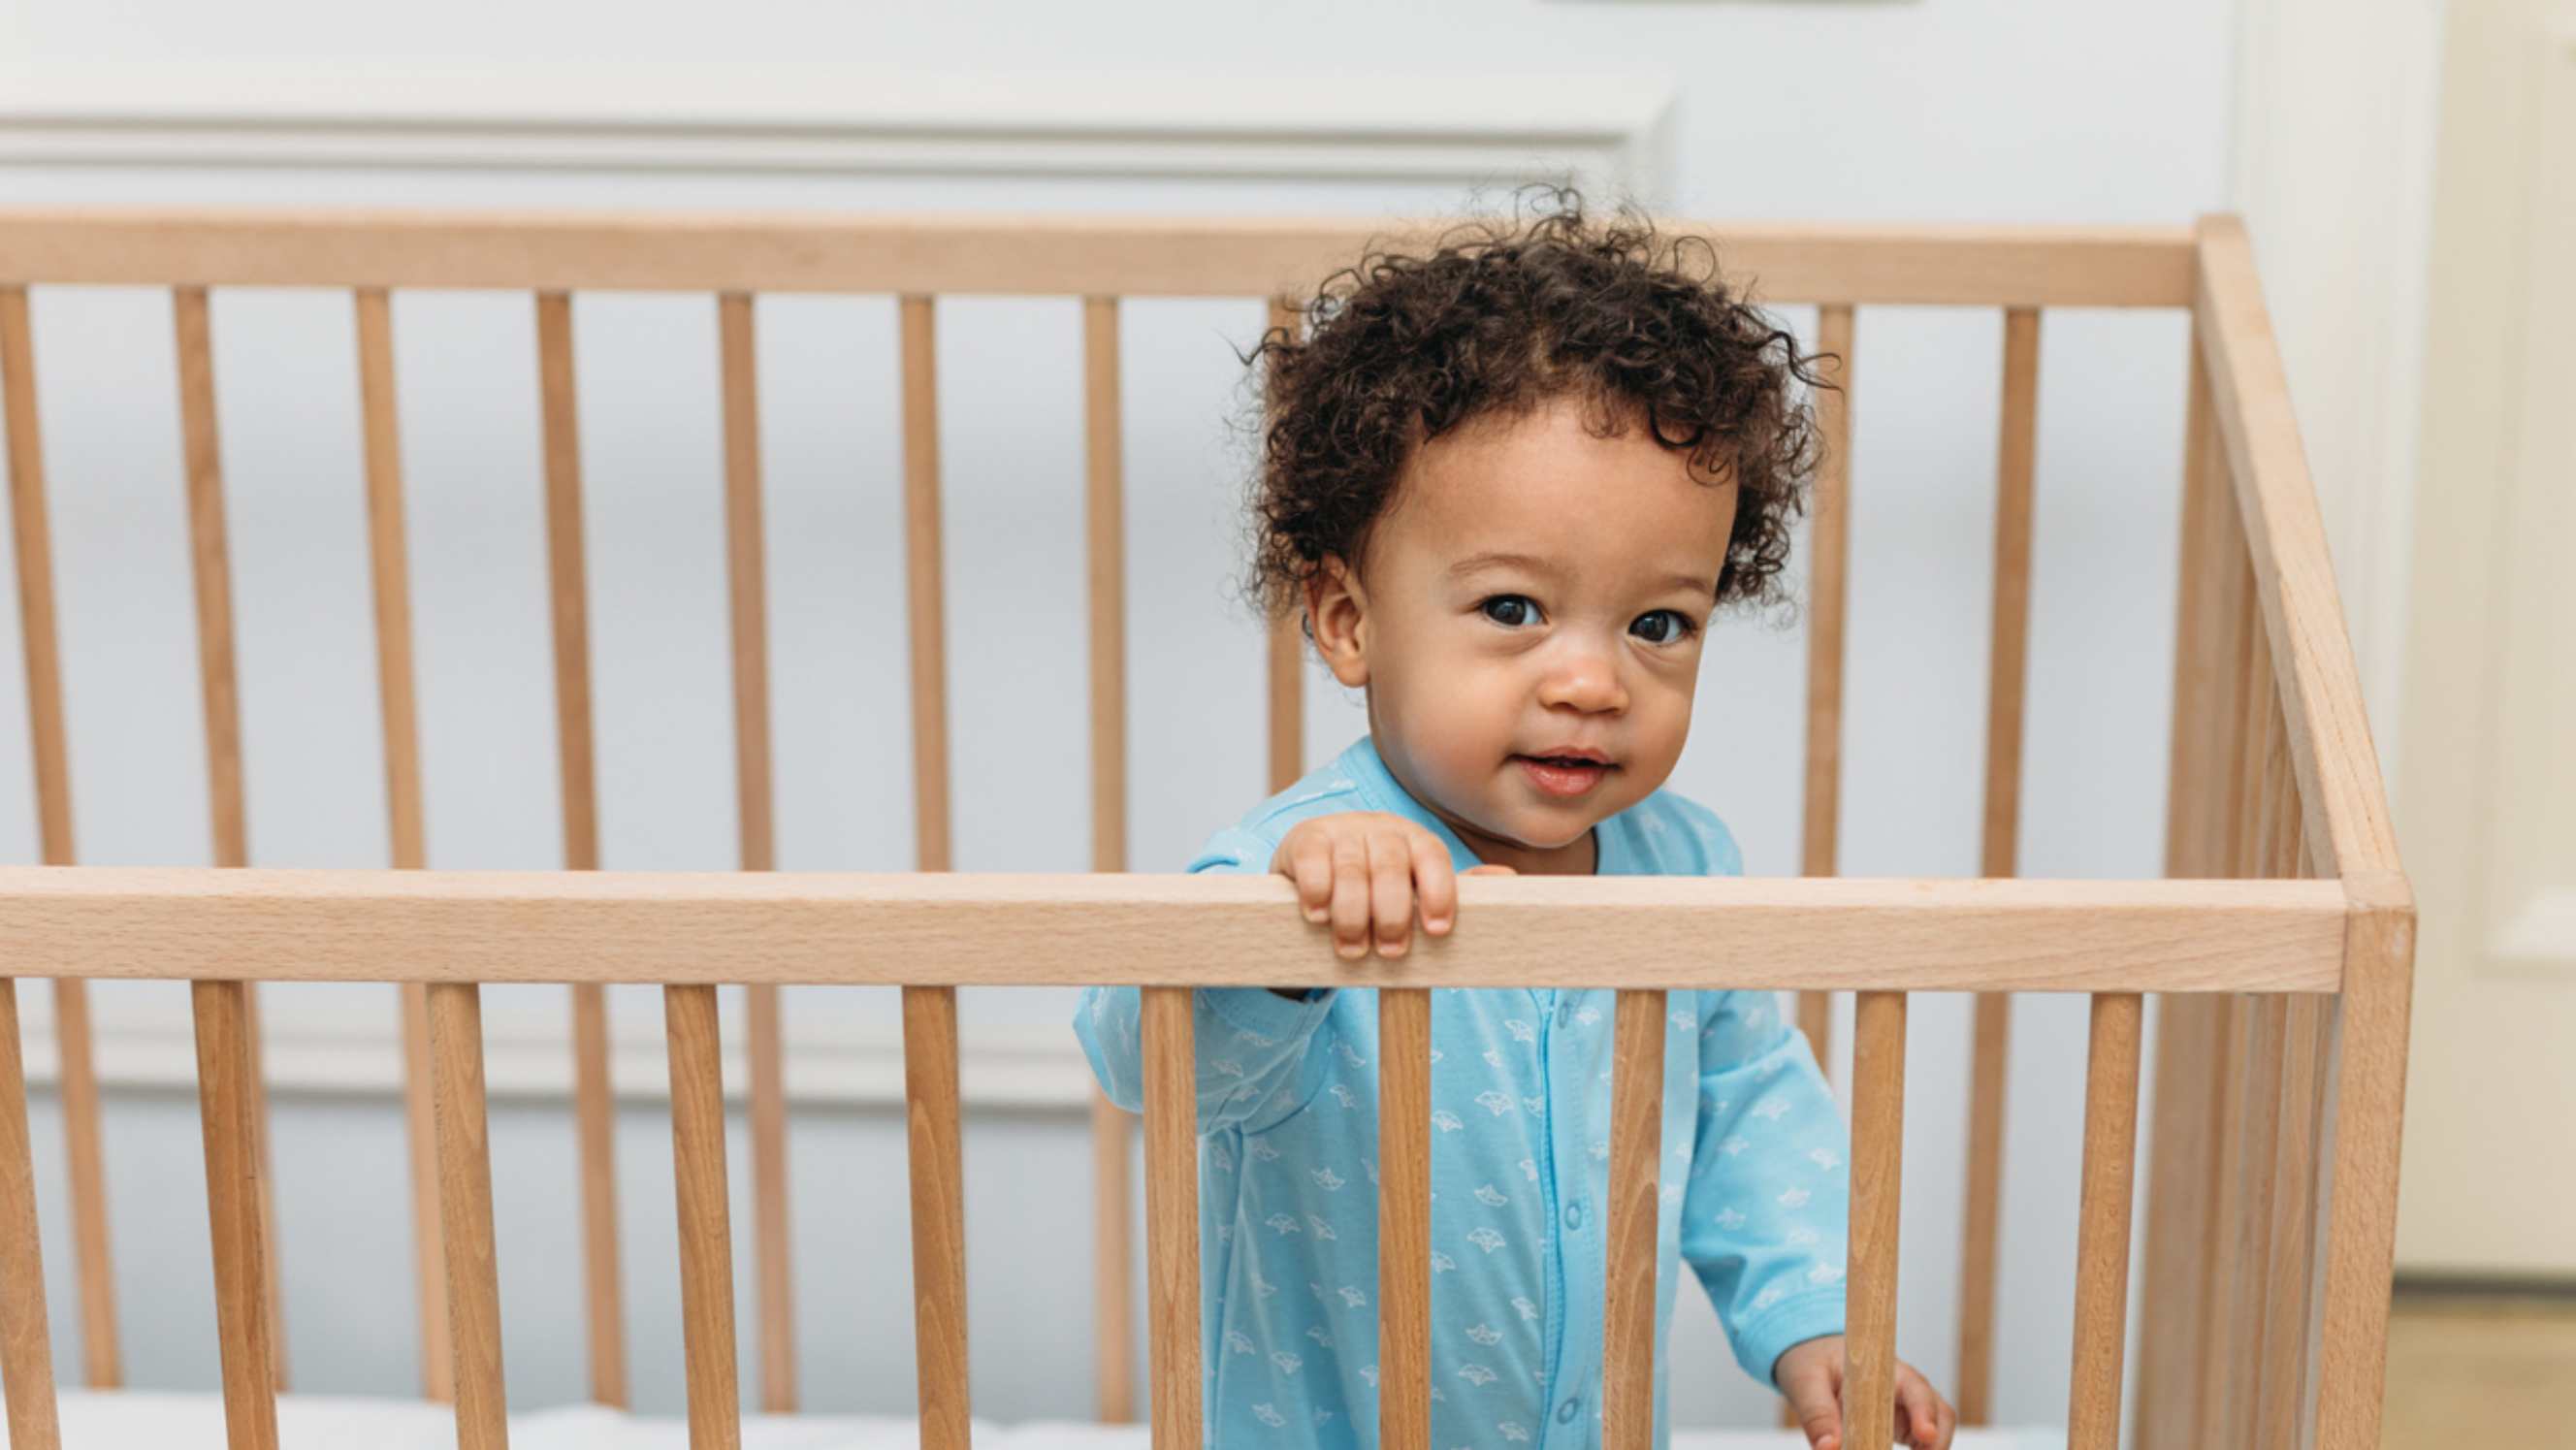 Bassinet vs. crib - A smiling baby standing in a wooden crib